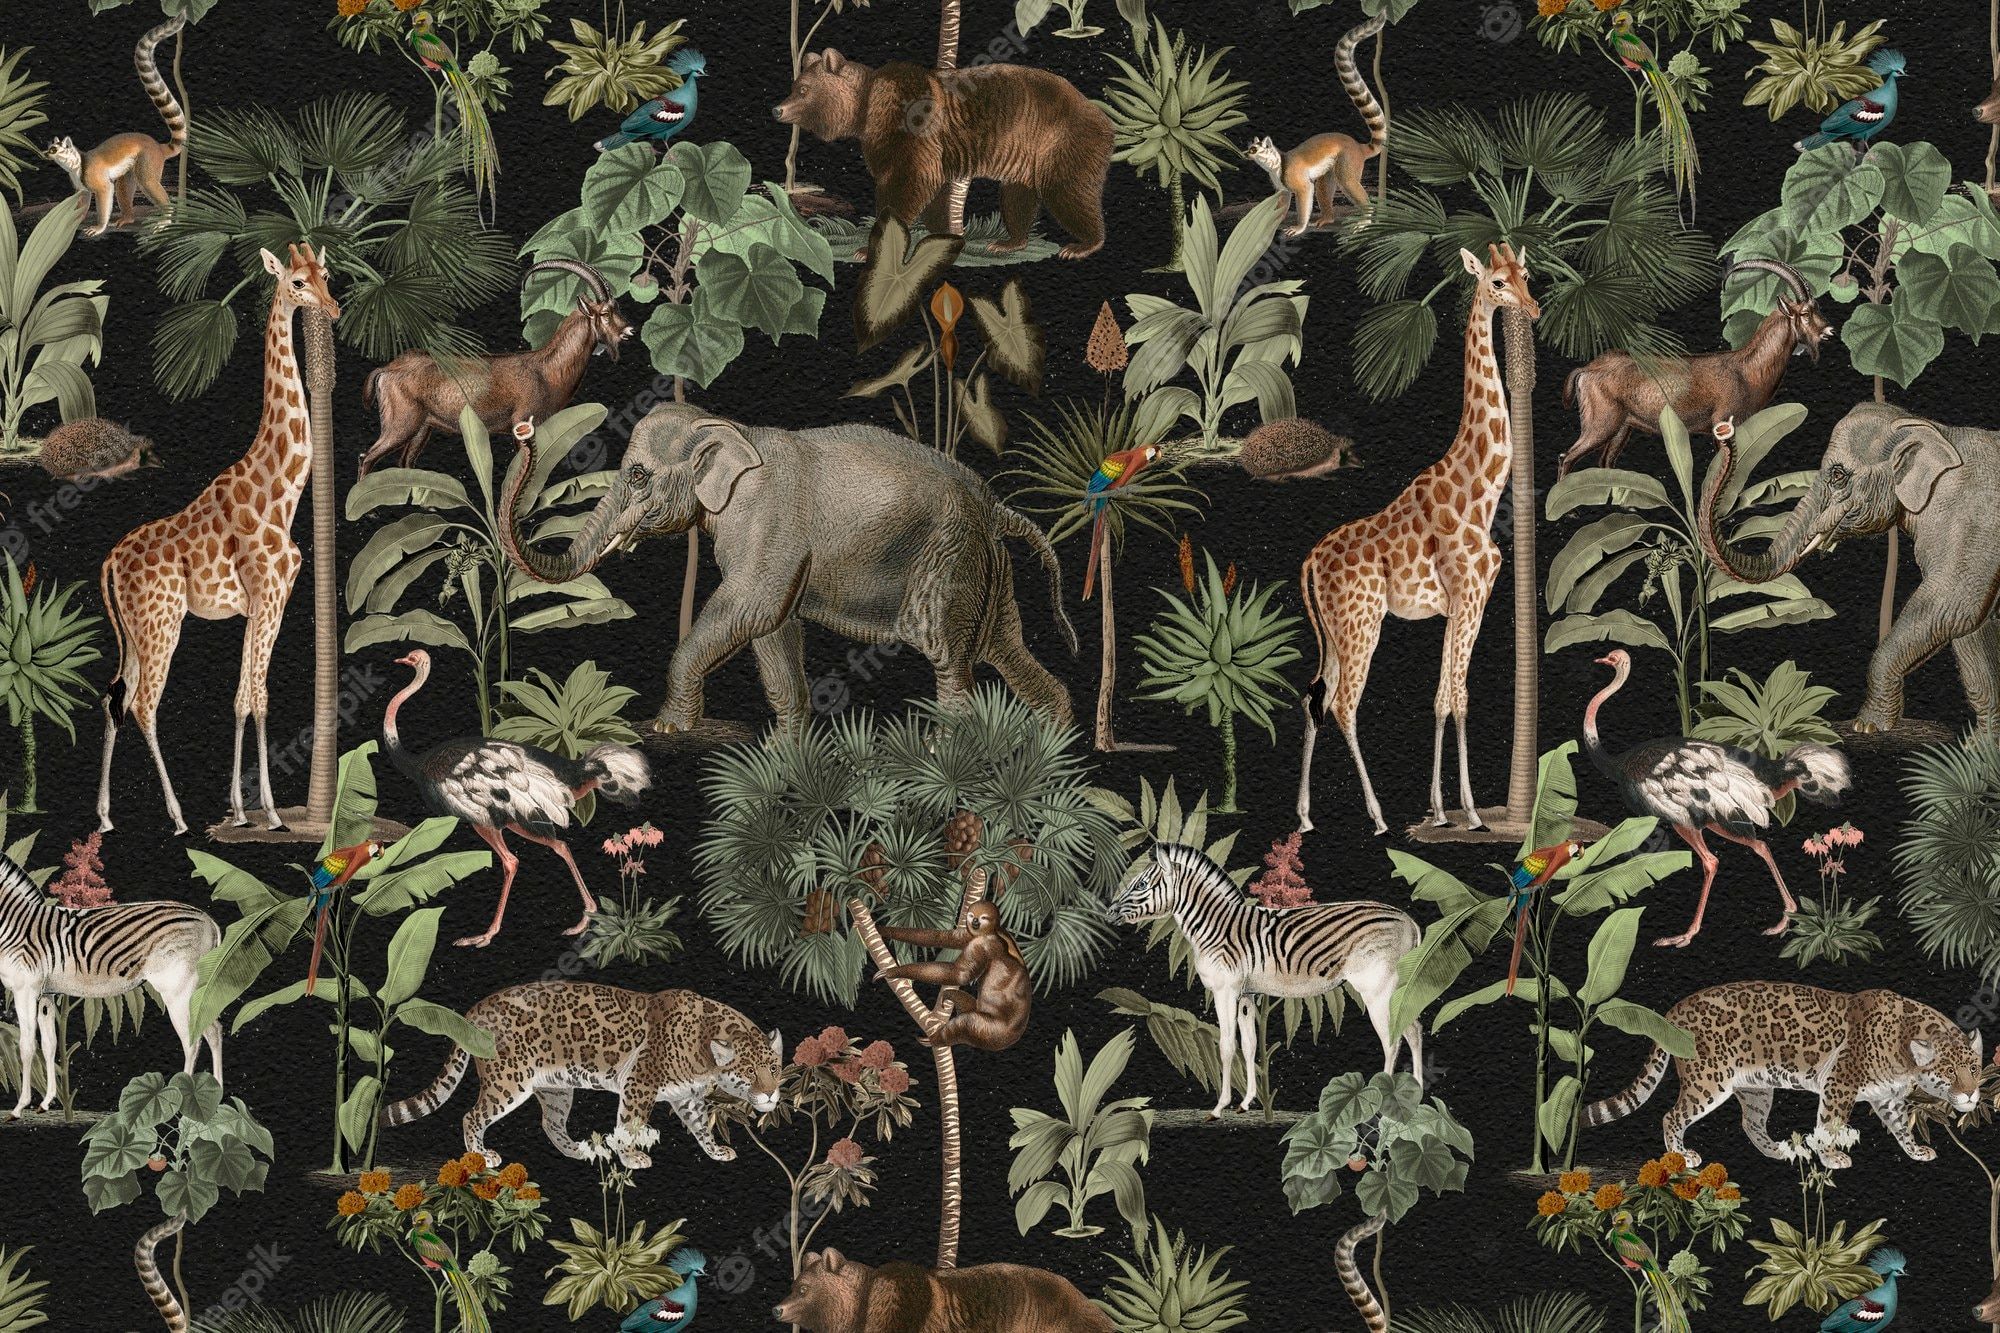 A wallpaper with animals in the jungle - Jungle